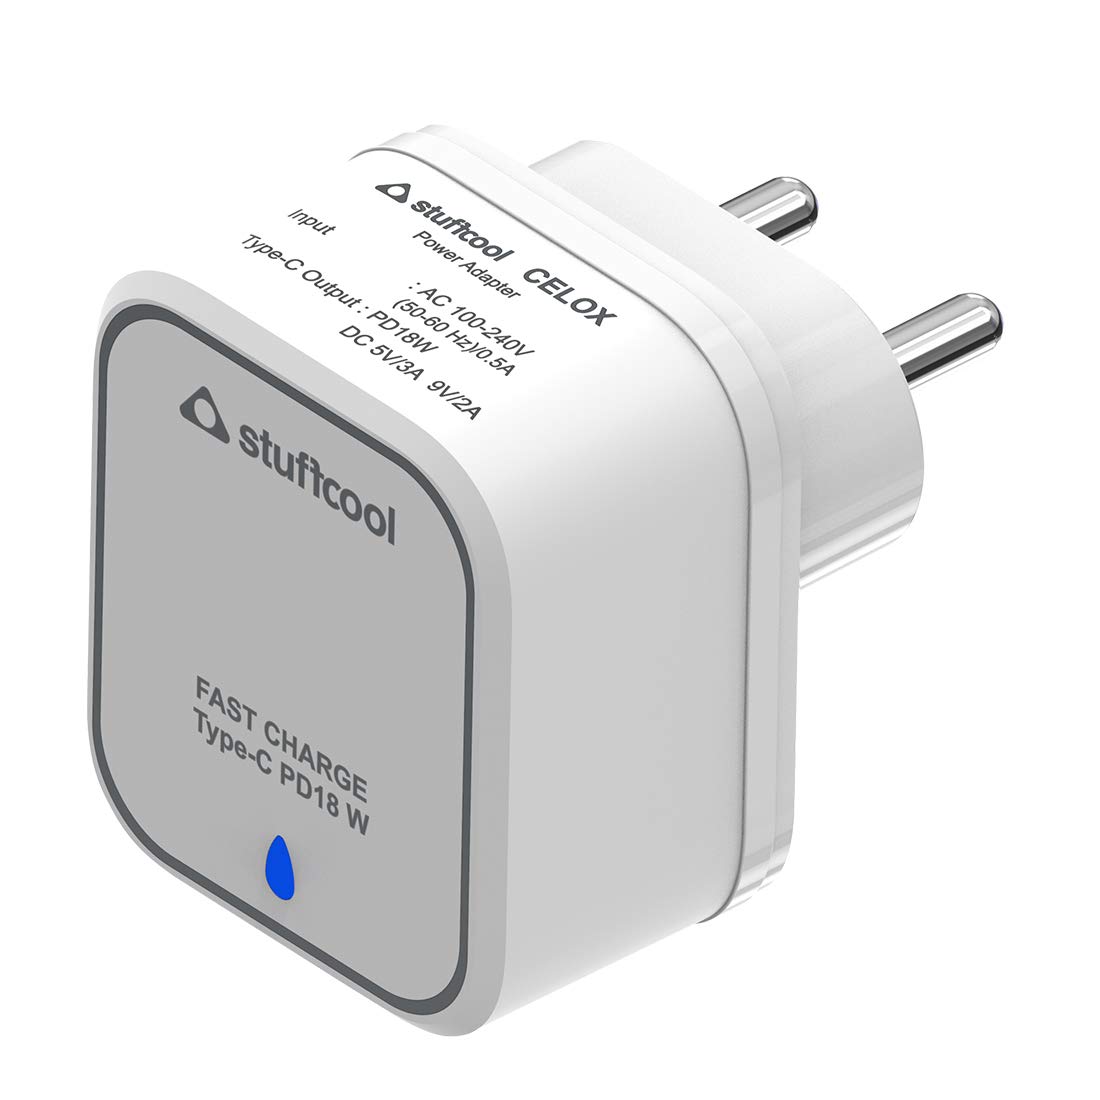 Stuffcool PD18W 18W Type-C wall charger launched for Rs. 1499